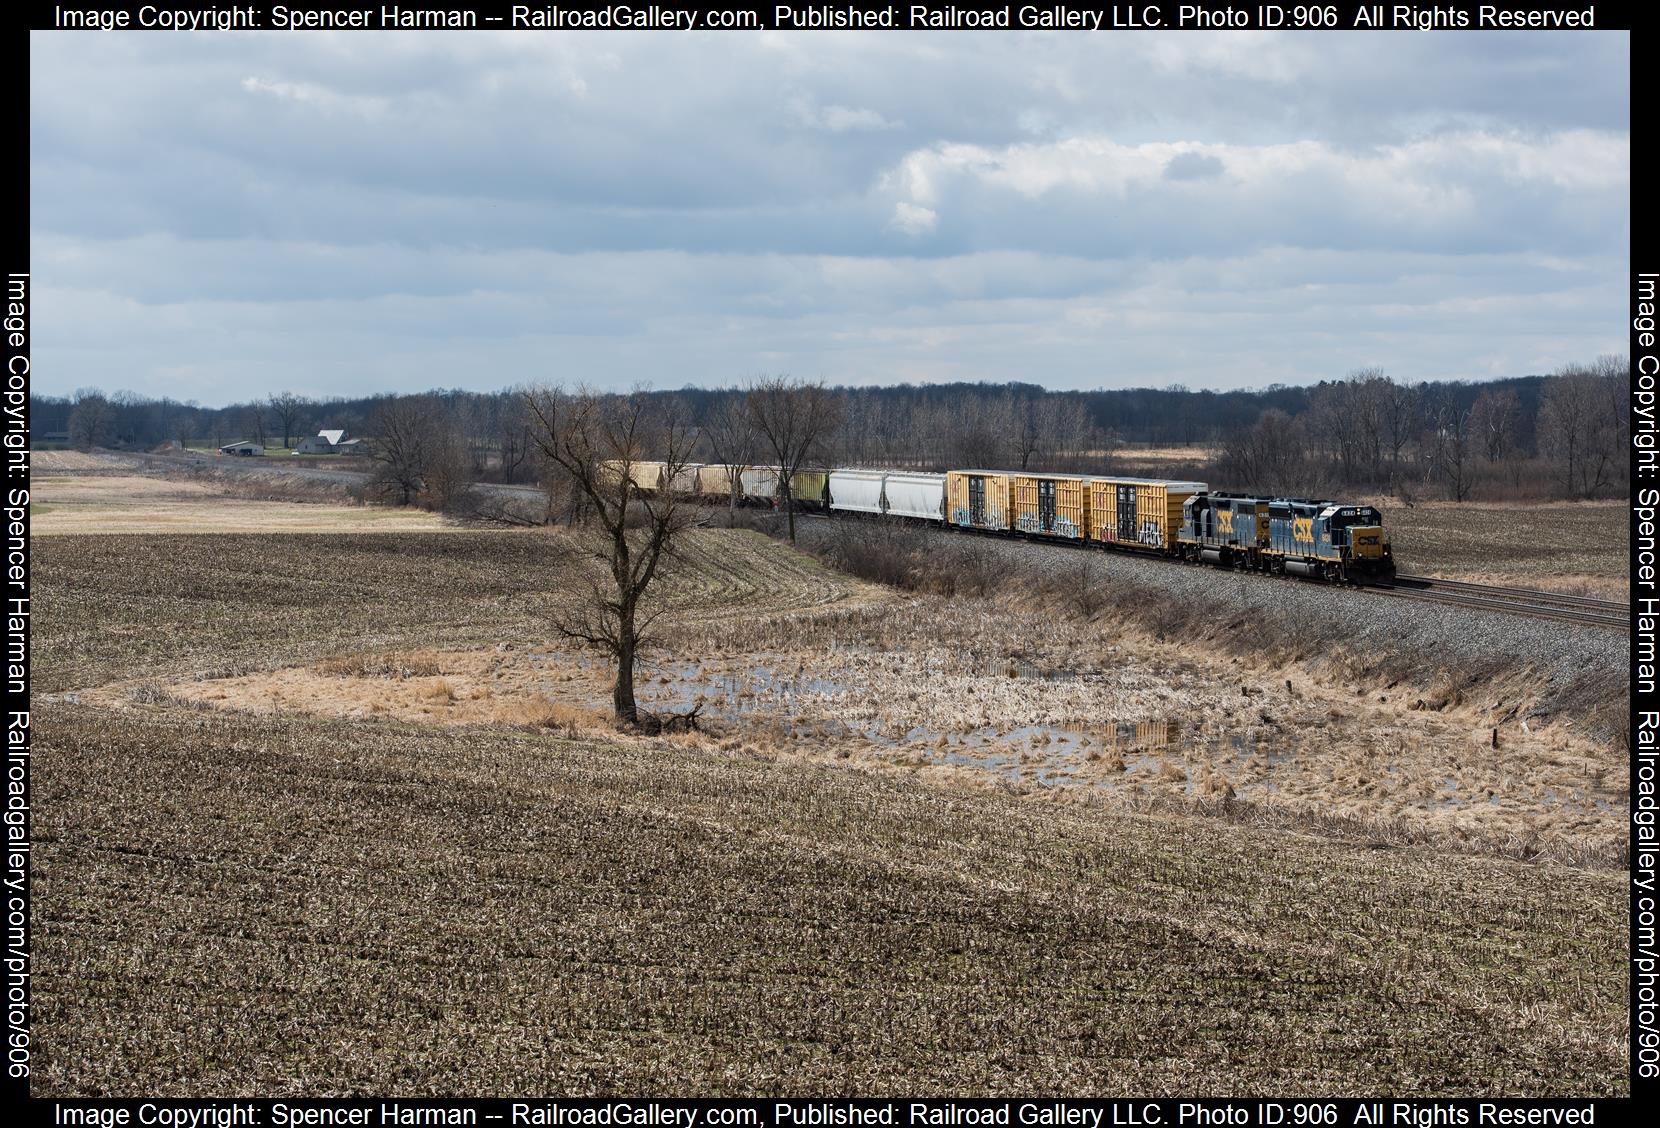 CSXT 6424 is a class EMD GP40-2 and  is pictured in Kimmel, Indiana, USA.  This was taken along the Garrett Subdivision on the CSX Transportation. Photo Copyright: Spencer Harman uploaded to Railroad Gallery on 03/31/2023. This photograph of CSXT 6424 was taken on Monday, March 27, 2023. All Rights Reserved. 